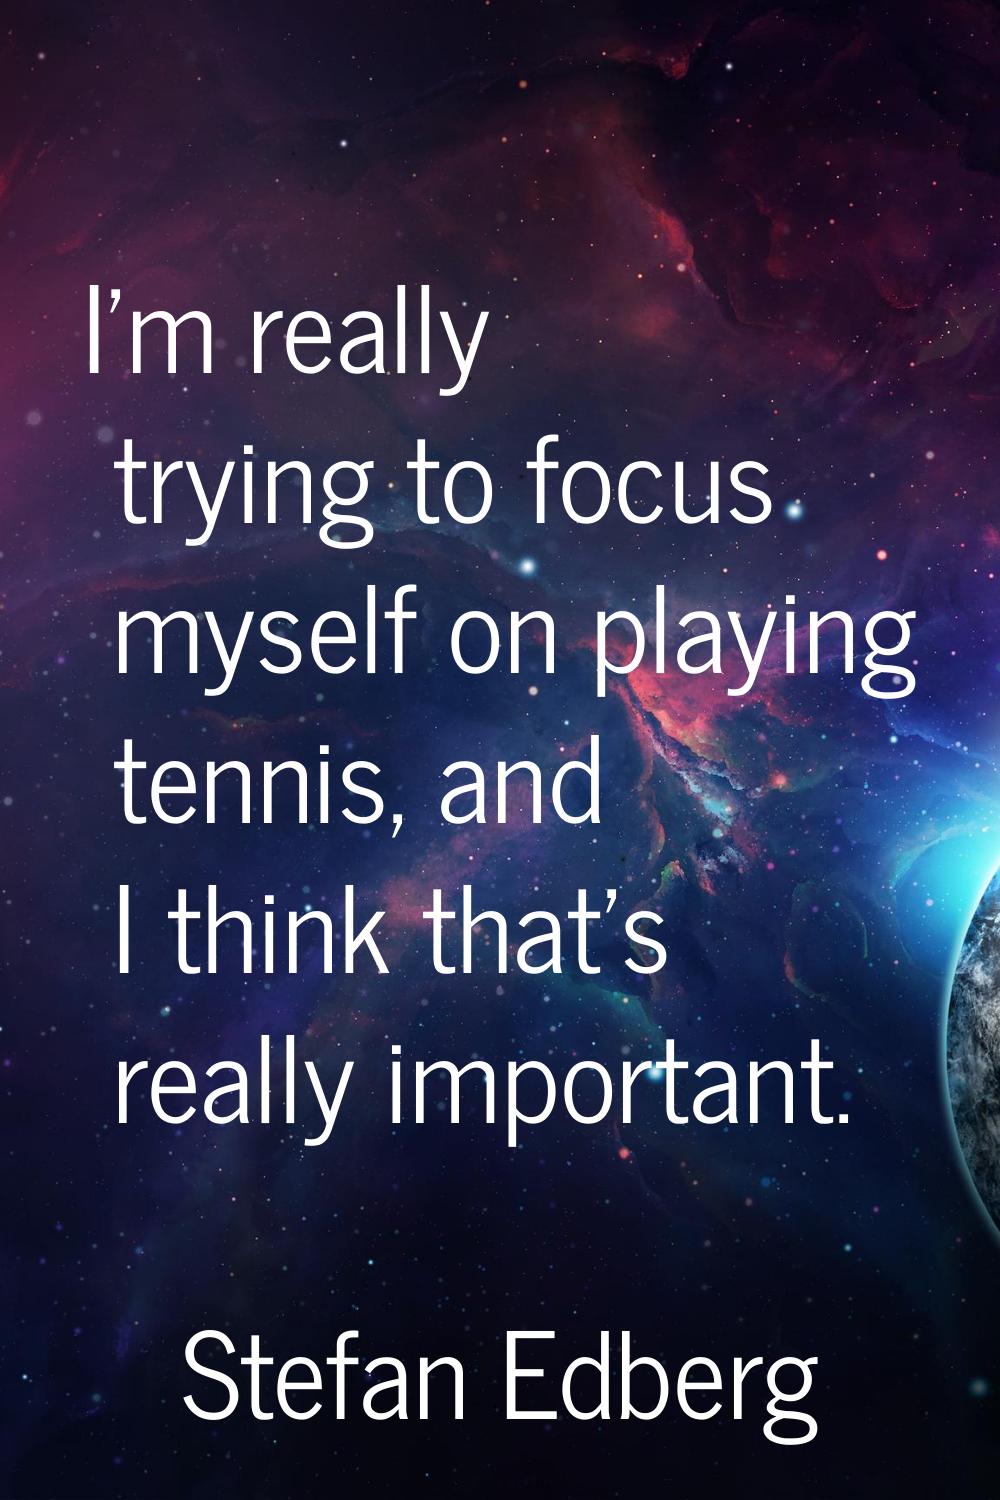 I'm really trying to focus myself on playing tennis, and I think that's really important.